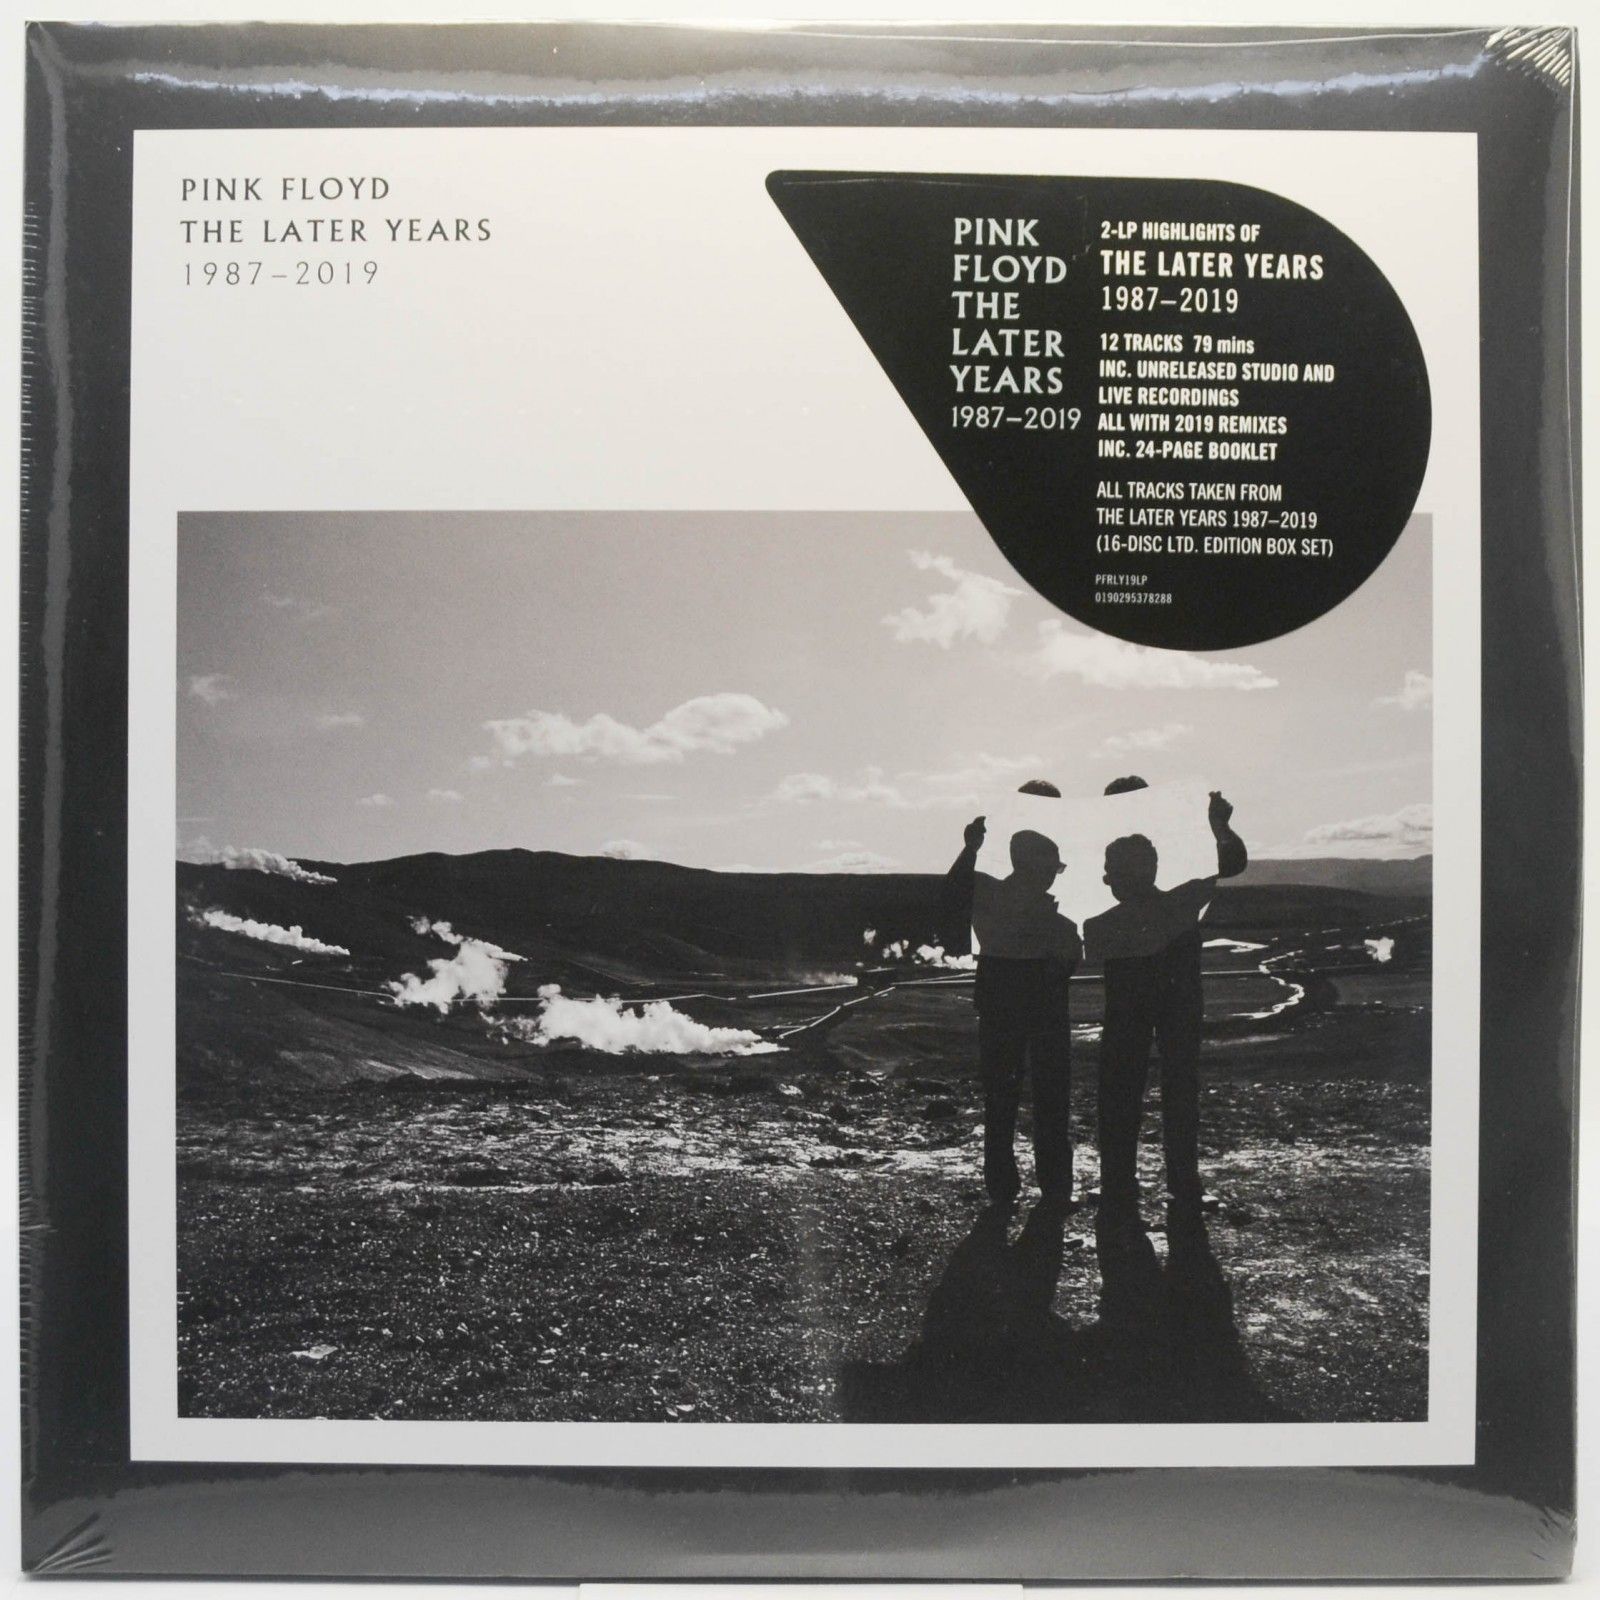 Pink Floyd — The Later Years 1987-2019 (2LP), 2019